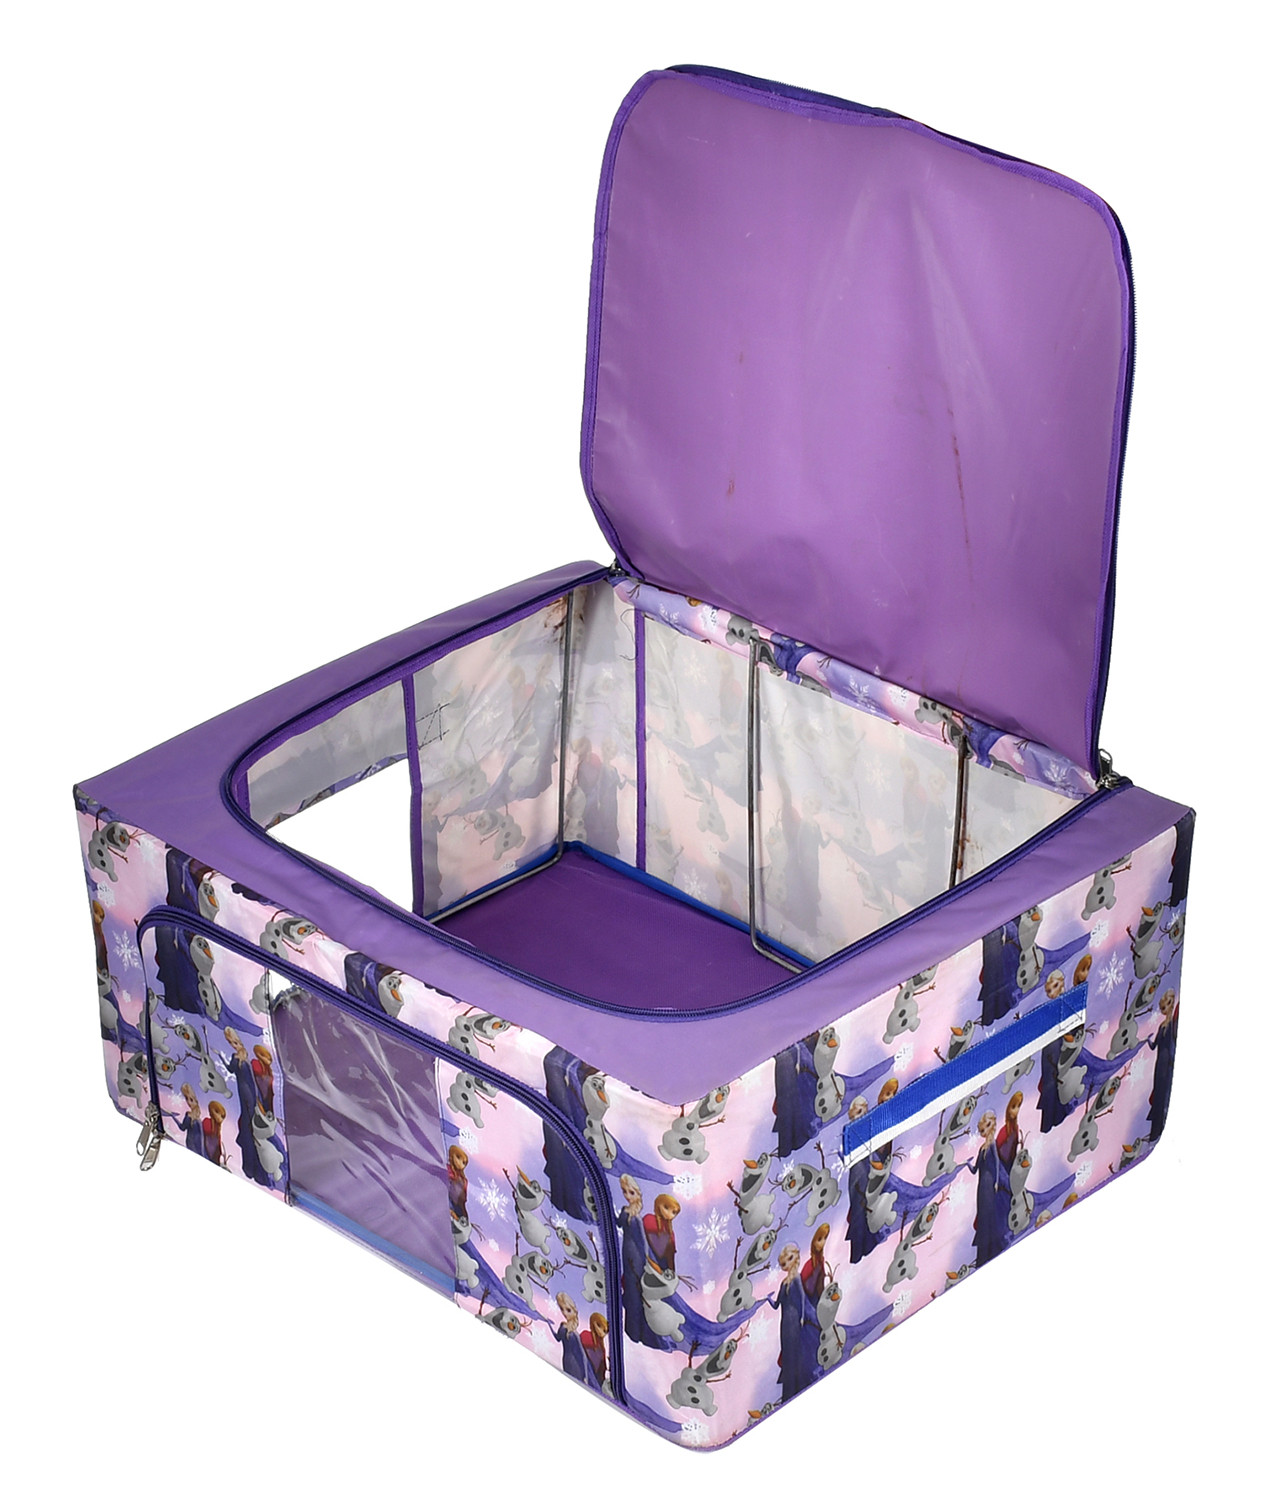 Kuber Industries Doll Print Steel Frame Living Box, Closet Organizer, Cloth Storage Boxes for Wardrobe With Clear Window, 44Ltr. (Purple) 54KM4097